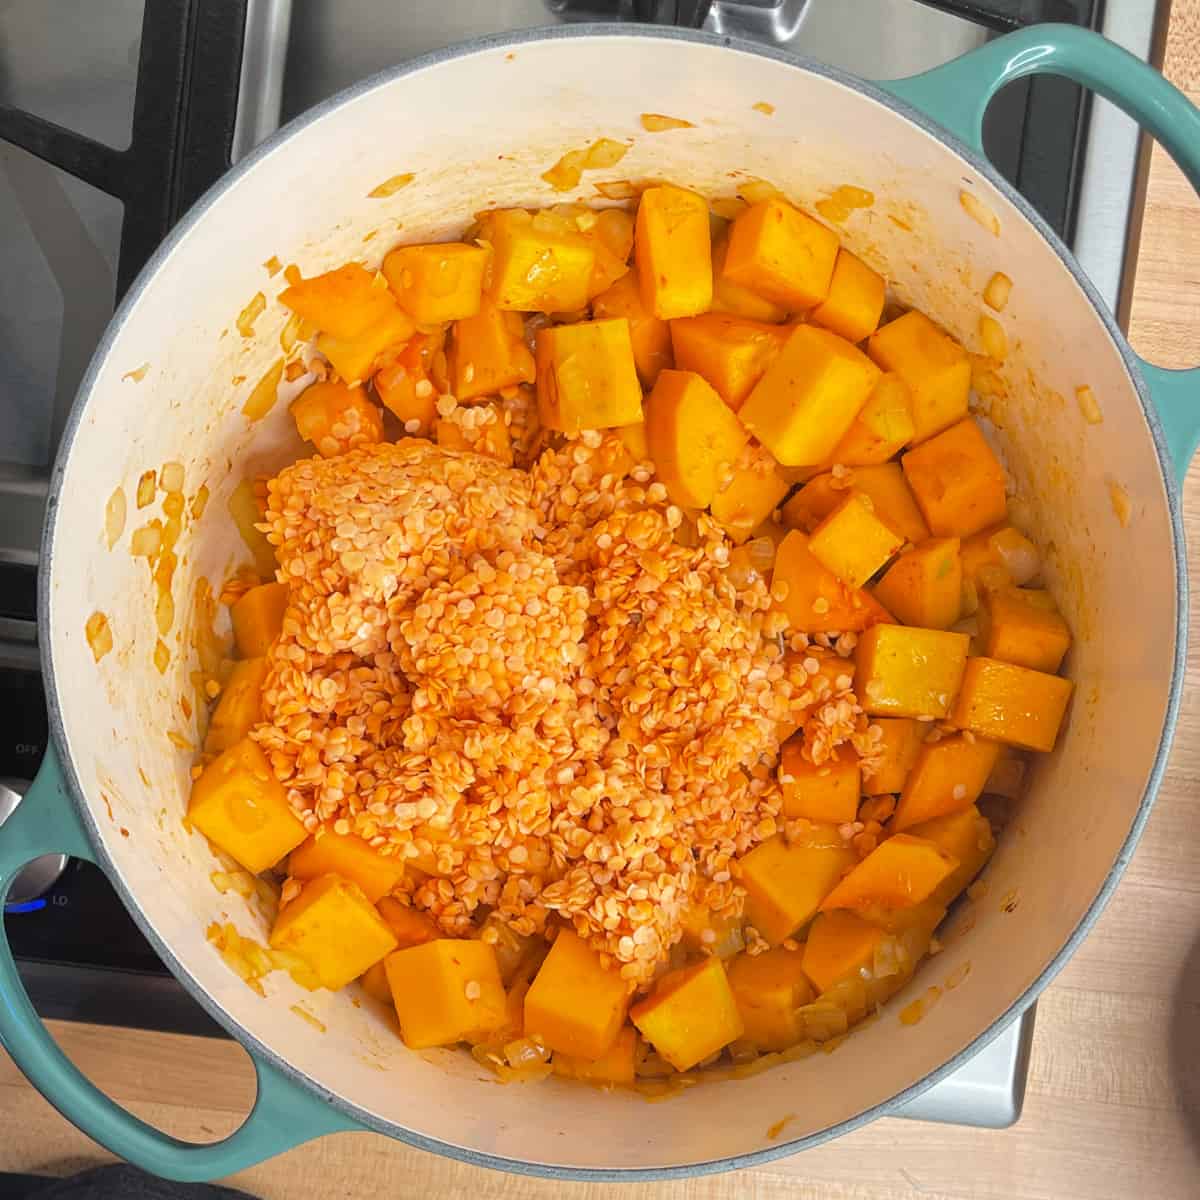 red curry, squash and lentils are added to the pot.